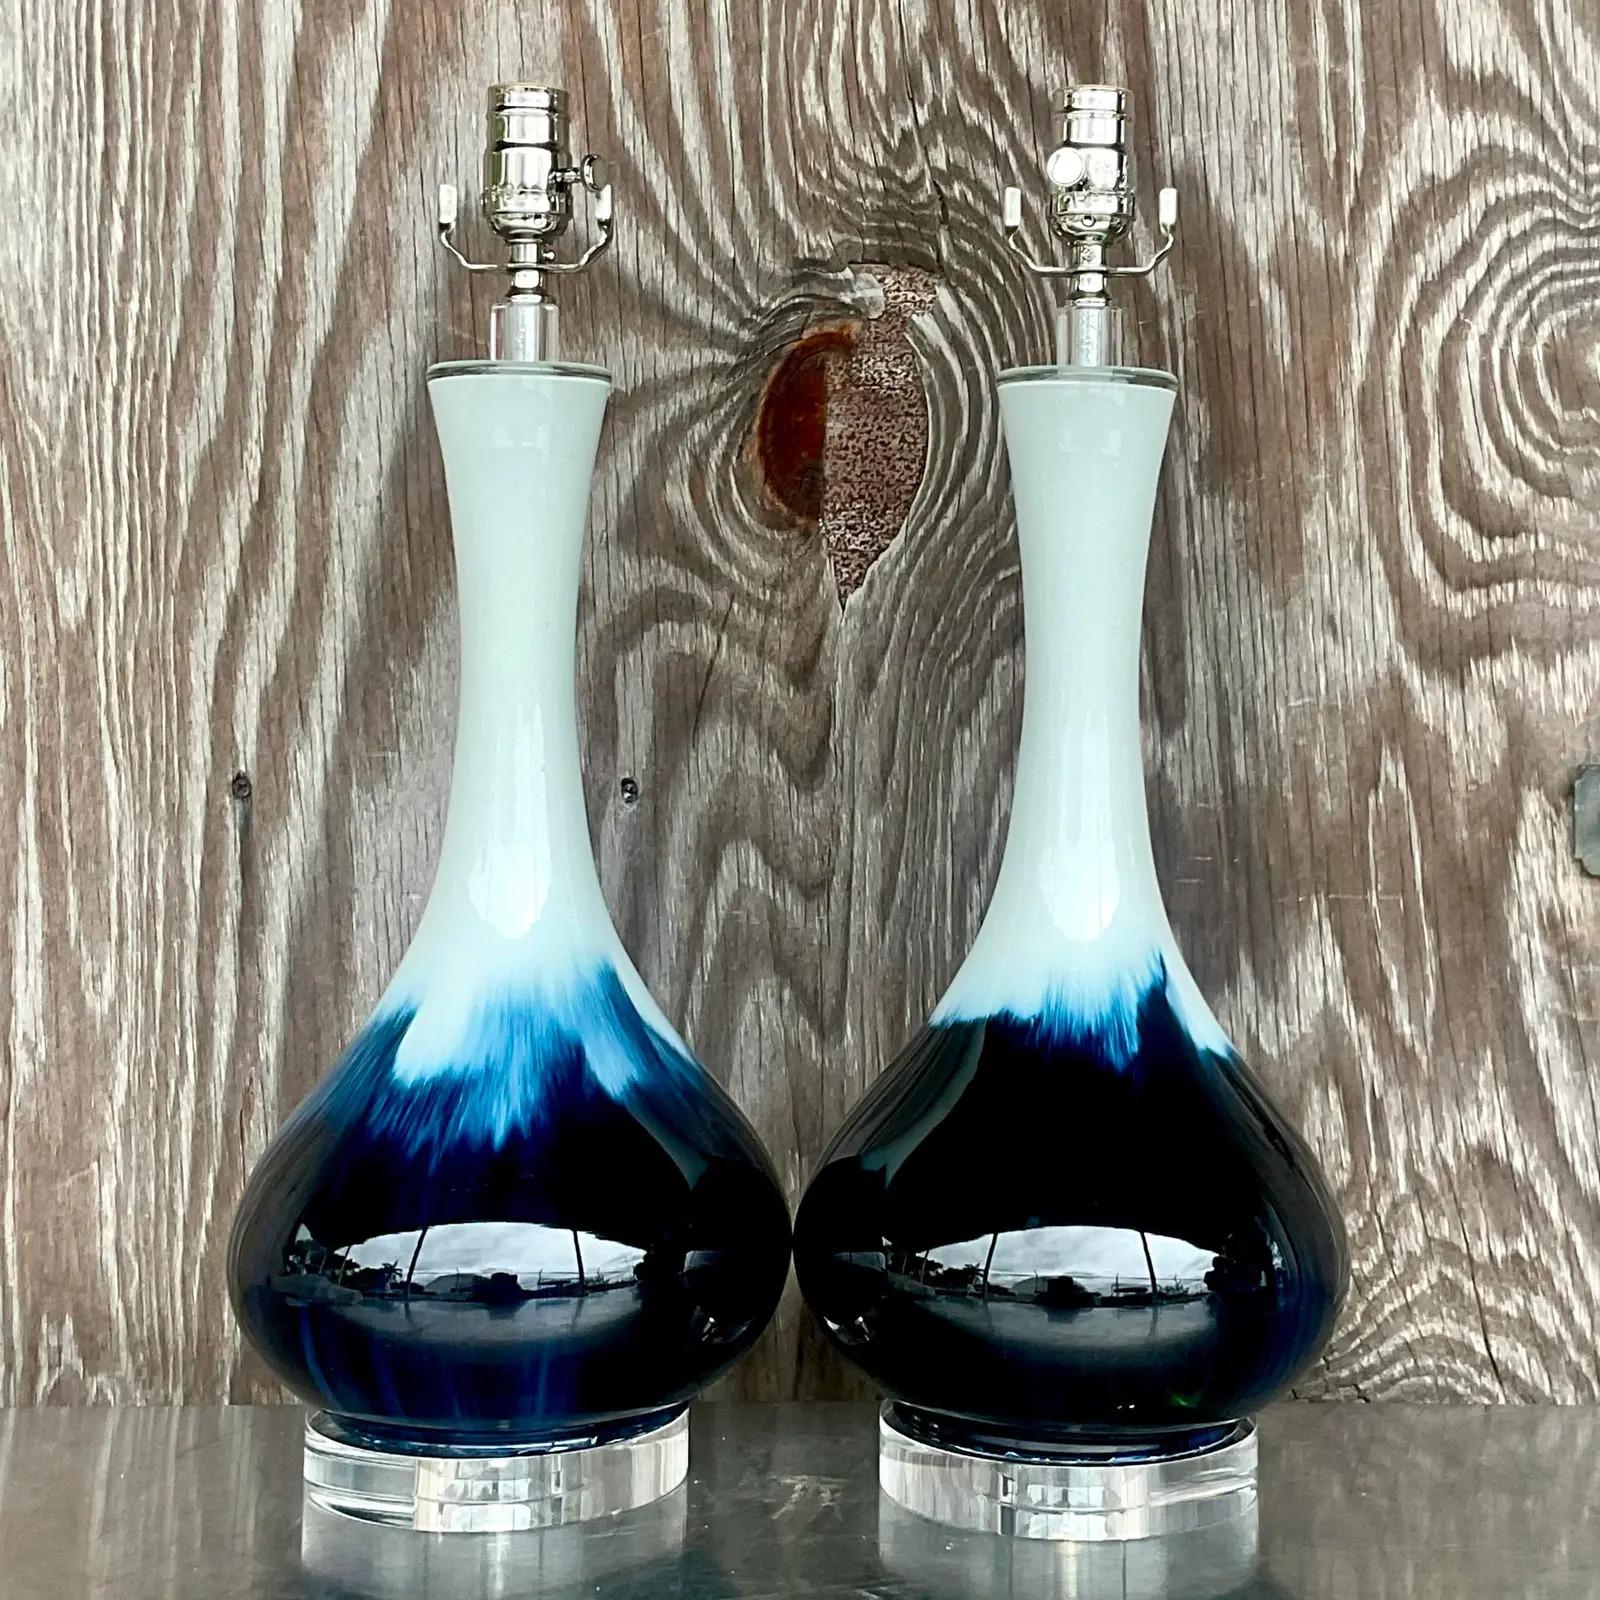 A stunning pair of vintage Coastal glazed ceramic table lamps. Beautiful shades of blue and huge on a classic bulb shape. Fully restored with all new hardware, wiring and lucite plinths. Acquired from a Palm Beach estate.